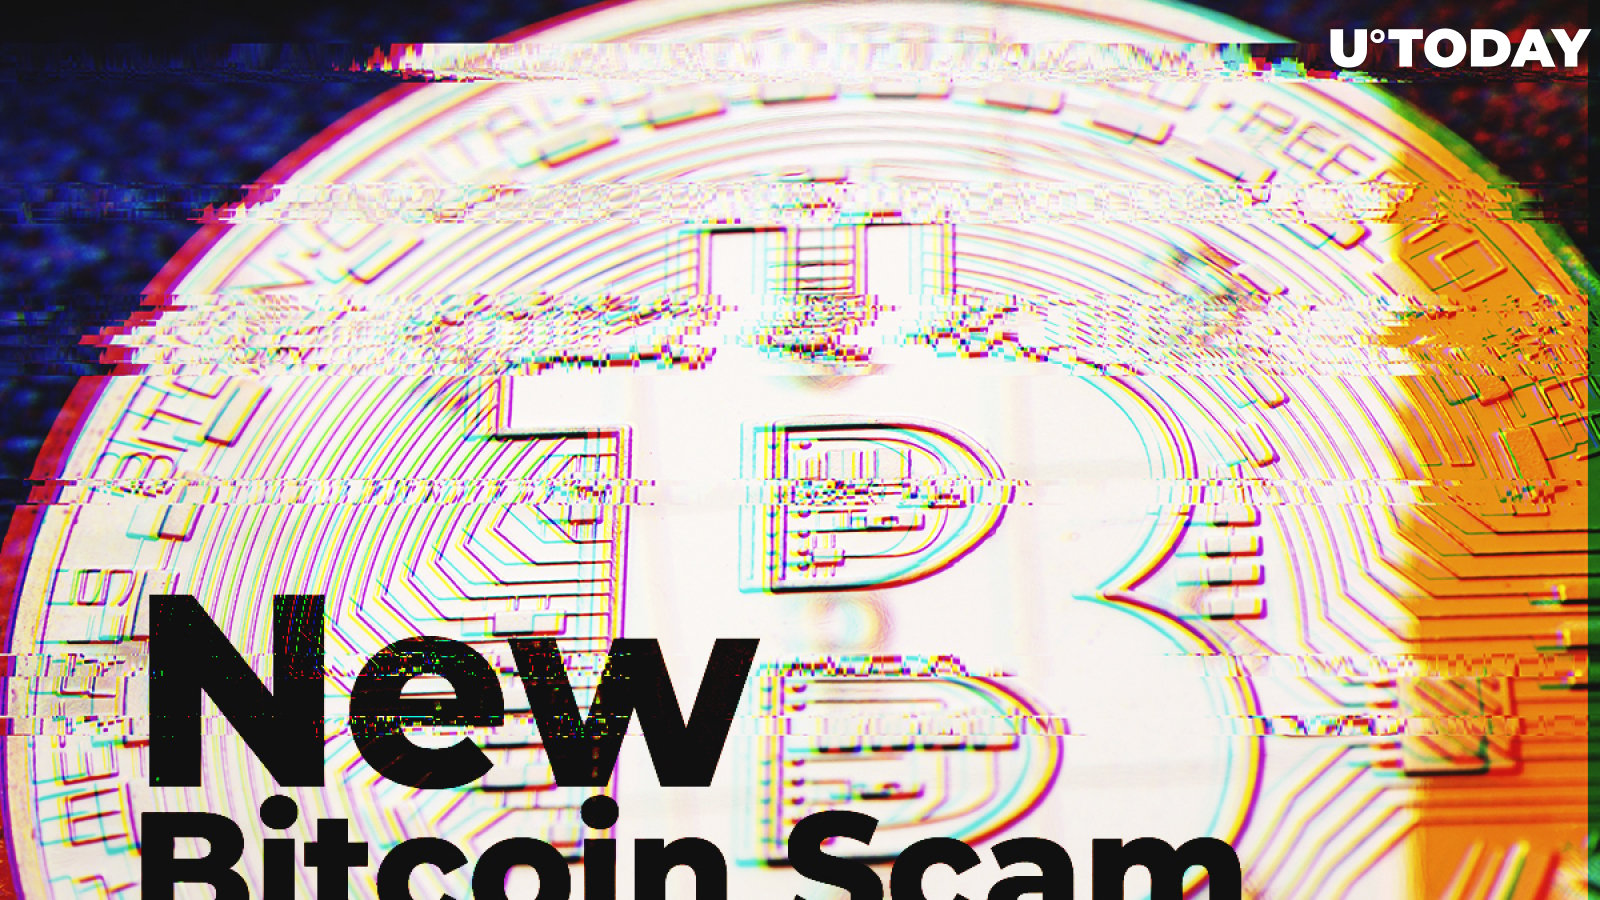 New Bitcoin Scam Becomes Popular on Social Media, Making MFSA Issue Warning for Investors